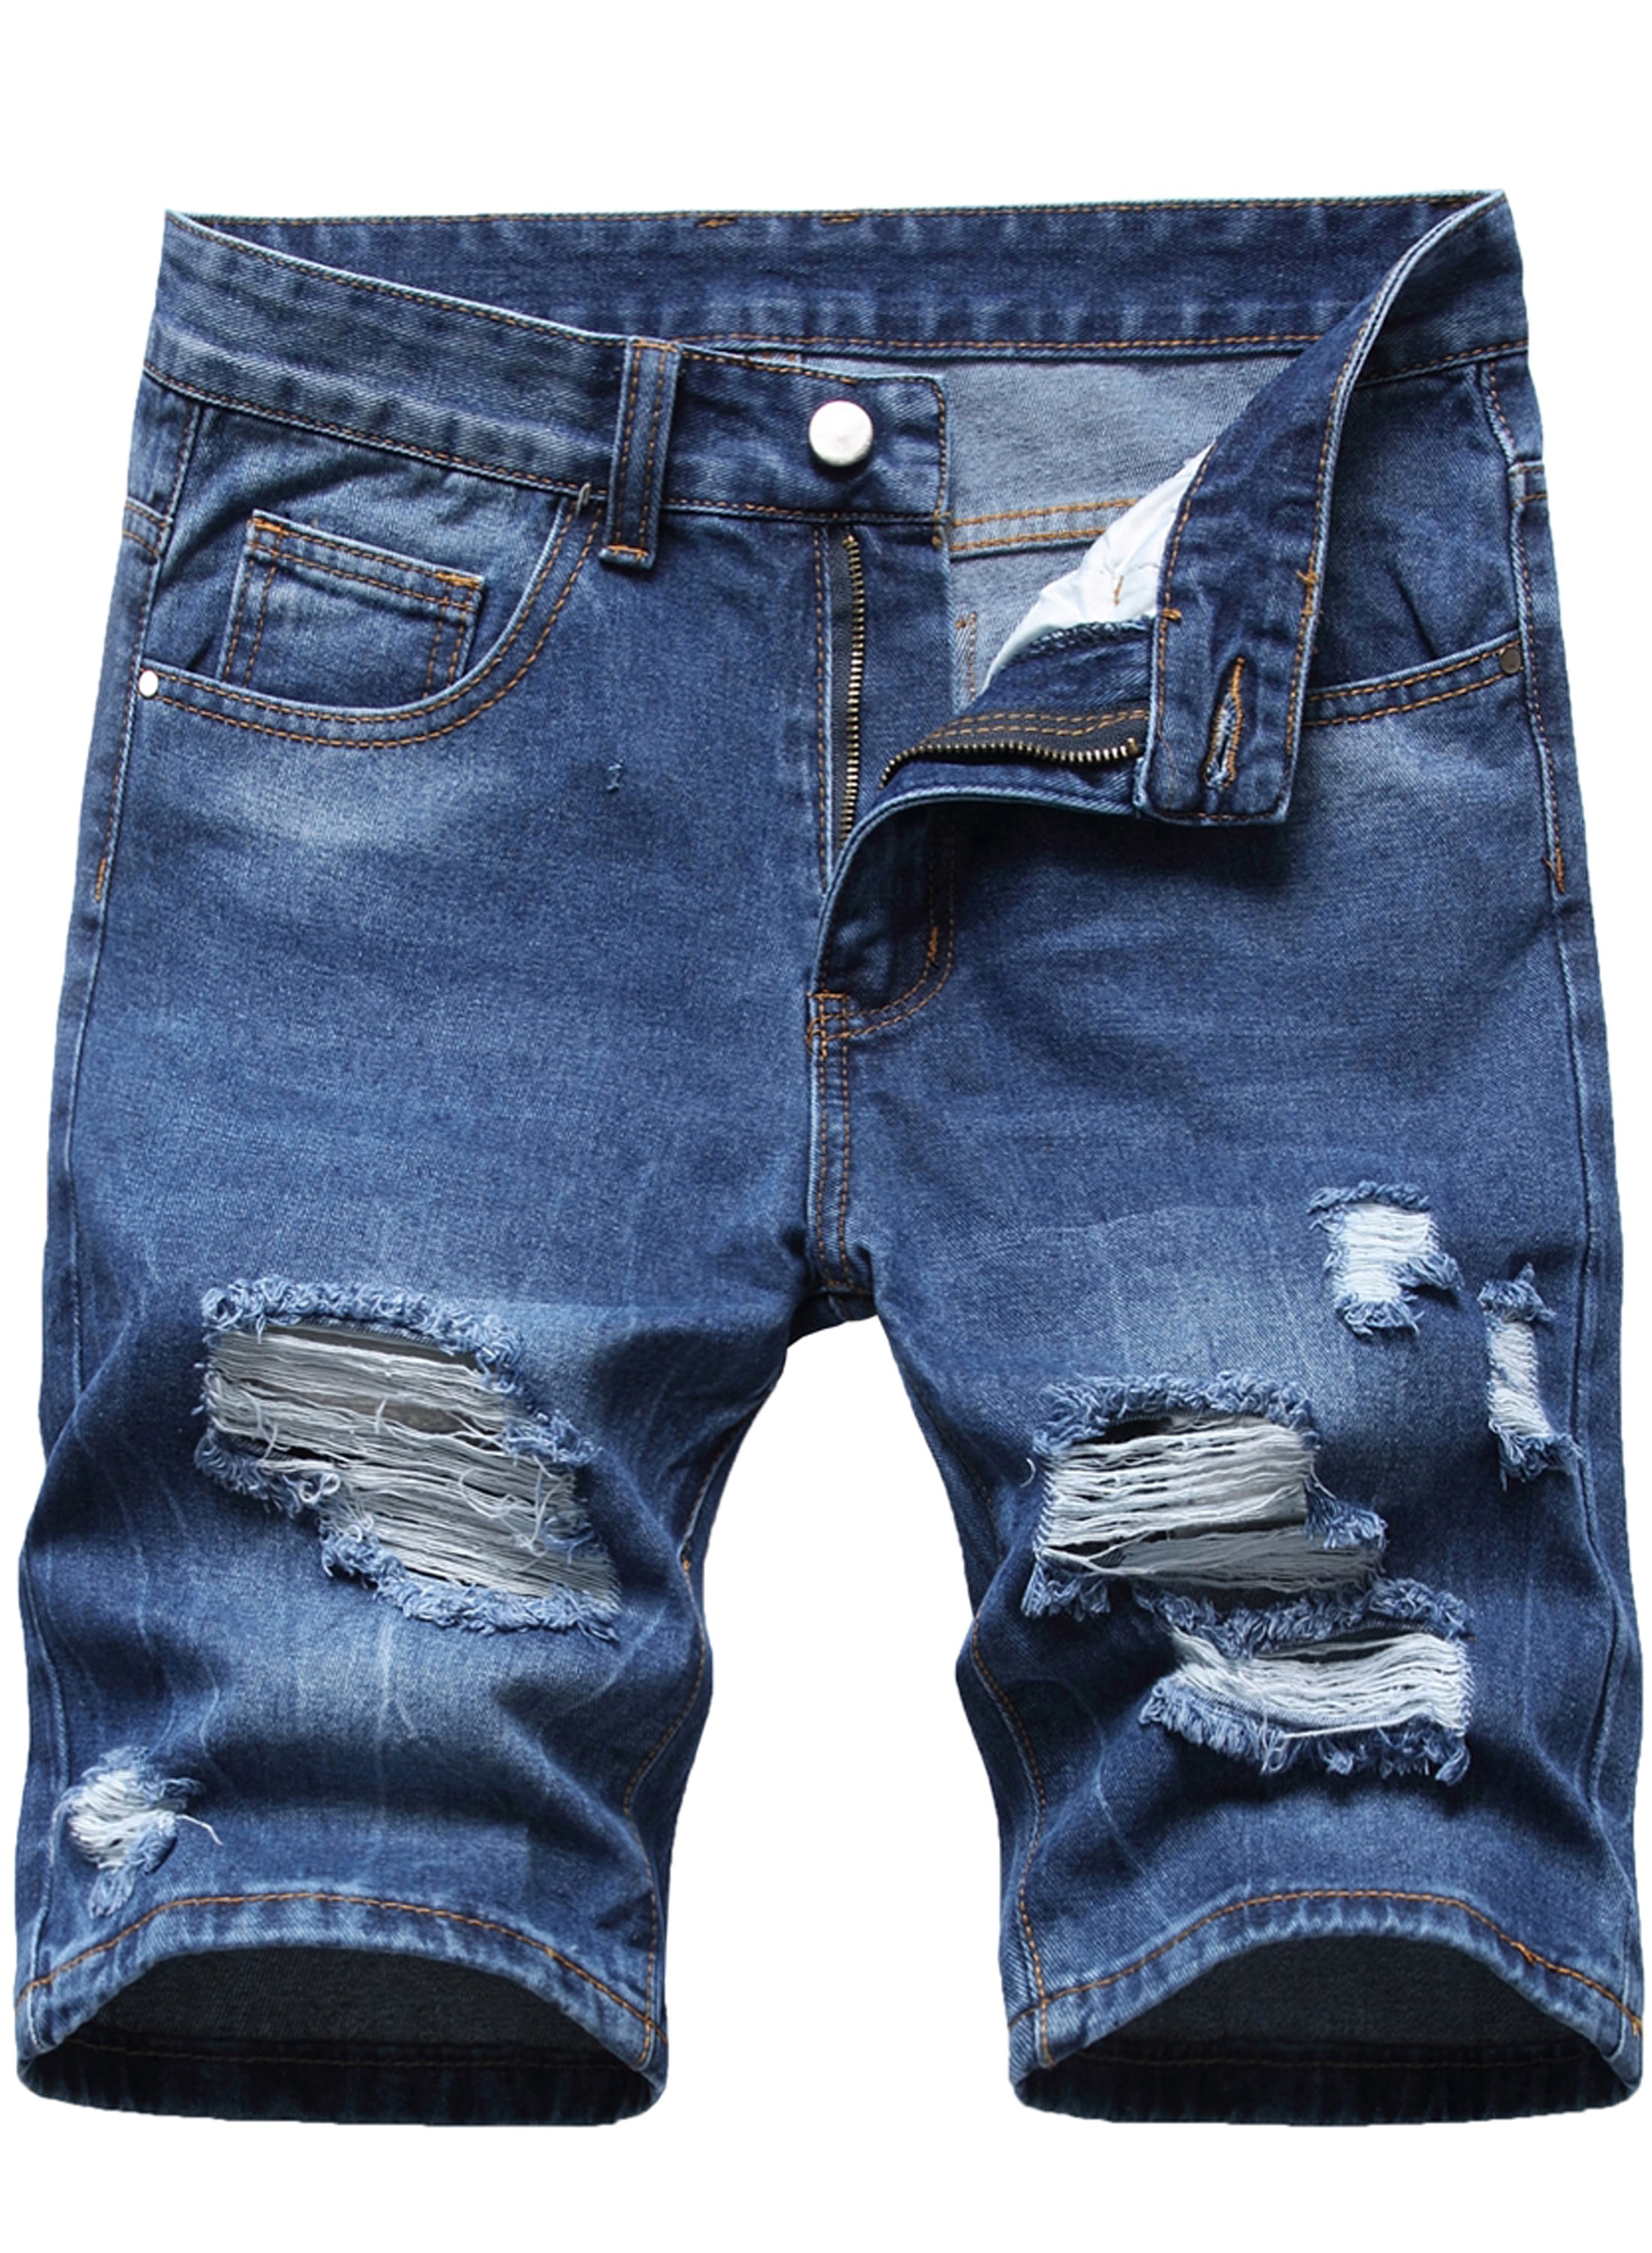 LZLER Mens Casual Jean Shorts Summer Relaxed Denim Shorts with Hole ...